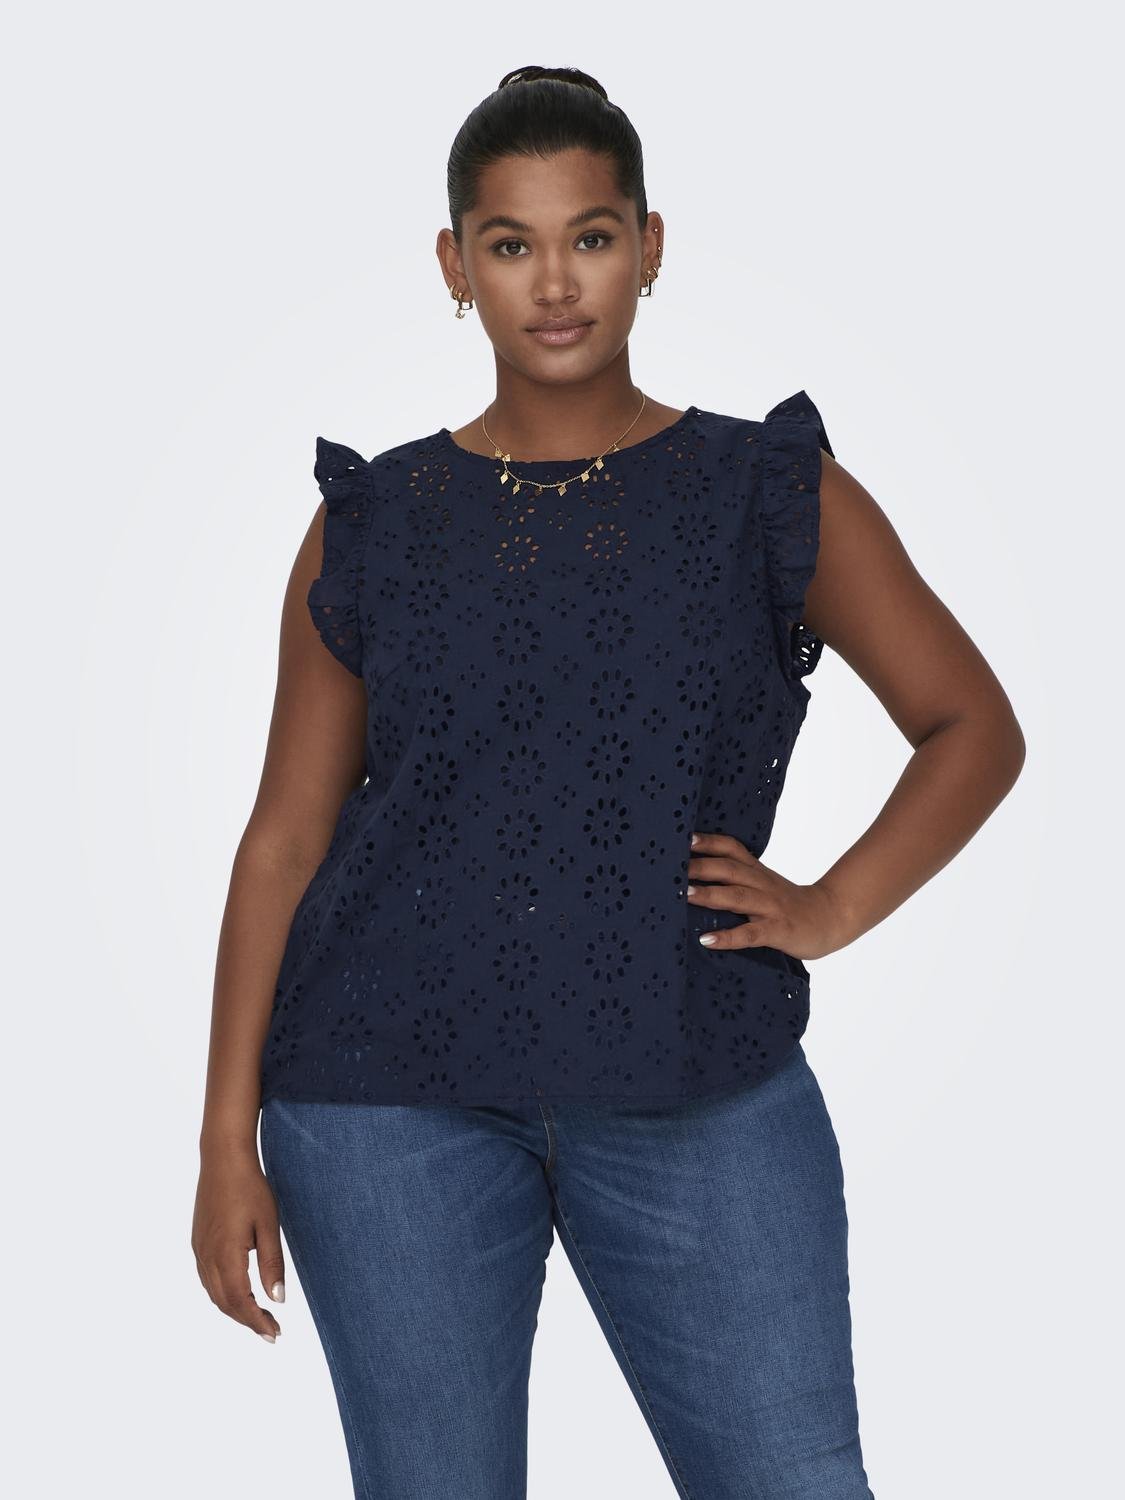 ONLY Curvy o-neck with frill -Sky Captain - 15312622